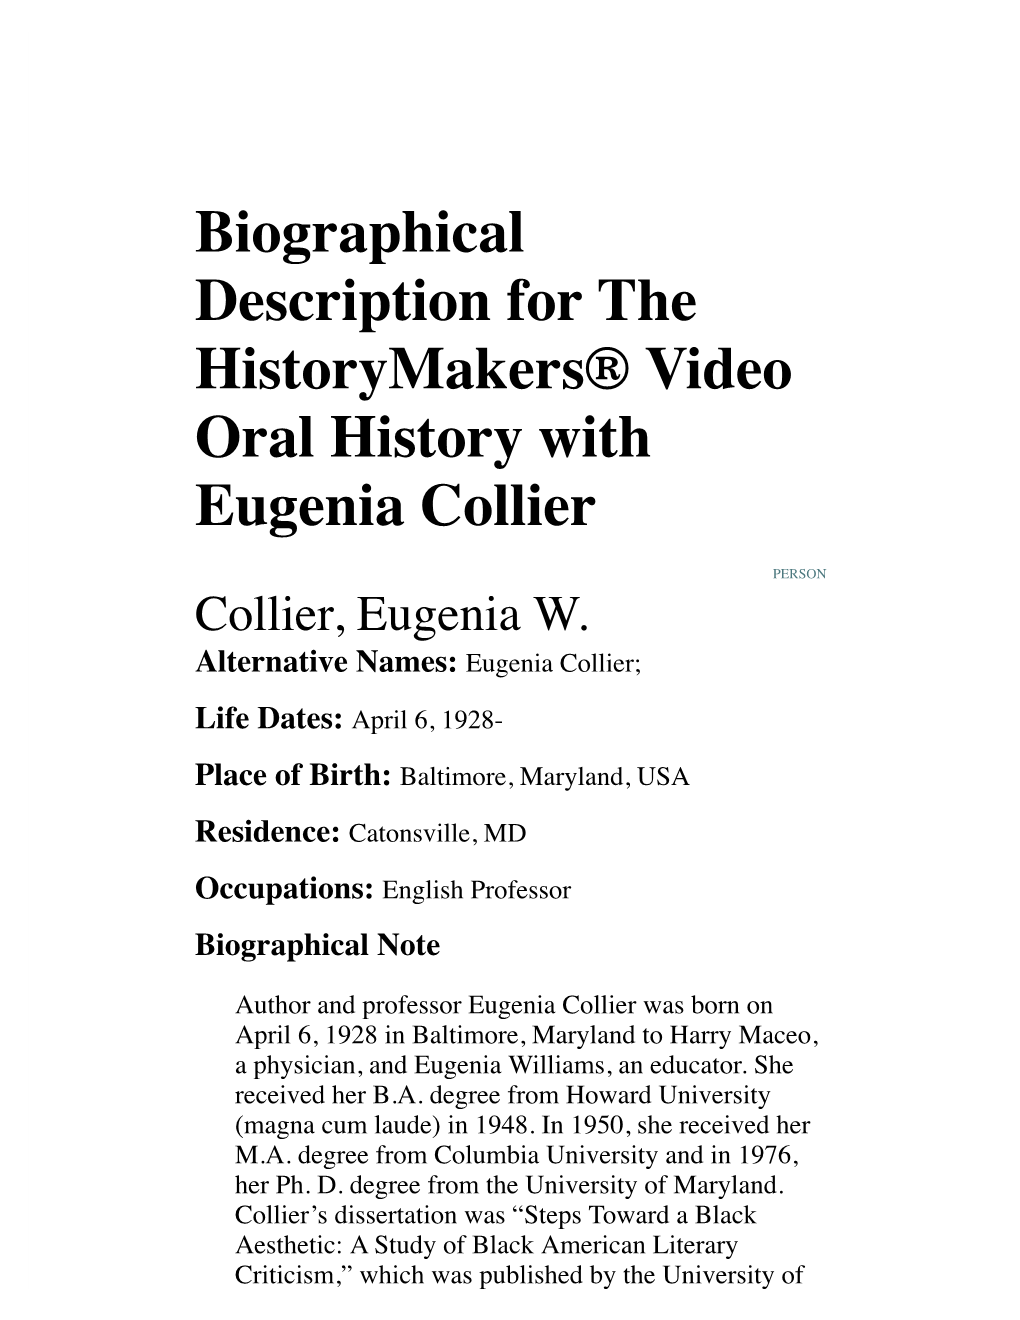 Biographical Description for the Historymakers® Video Oral History with Eugenia Collier